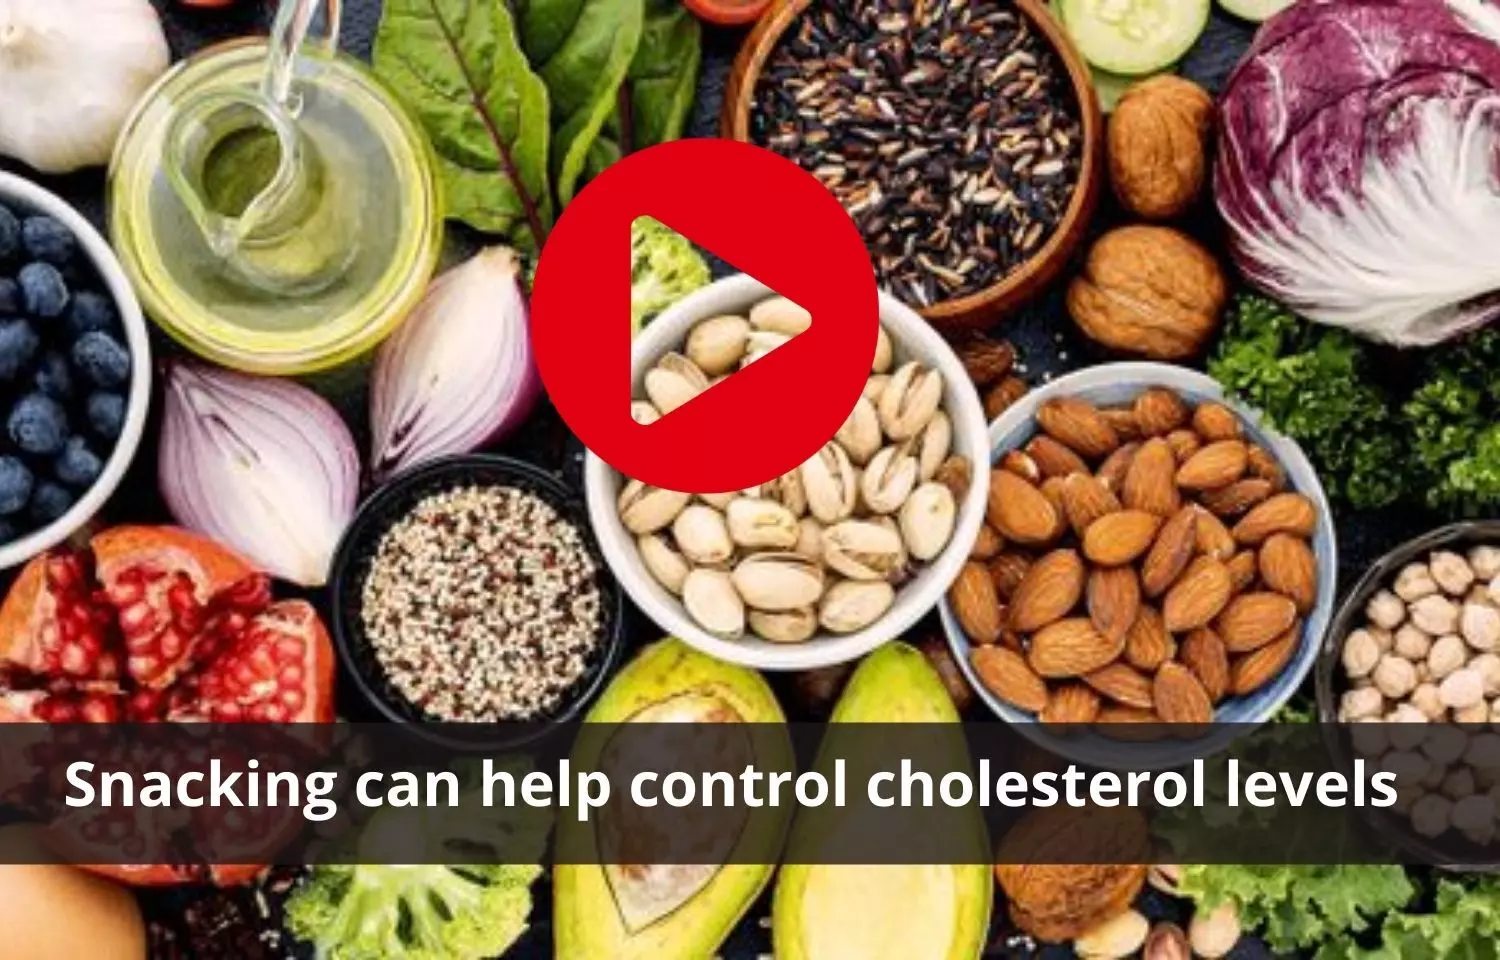 Snacking to turn healthy by reducing cholesterol levels